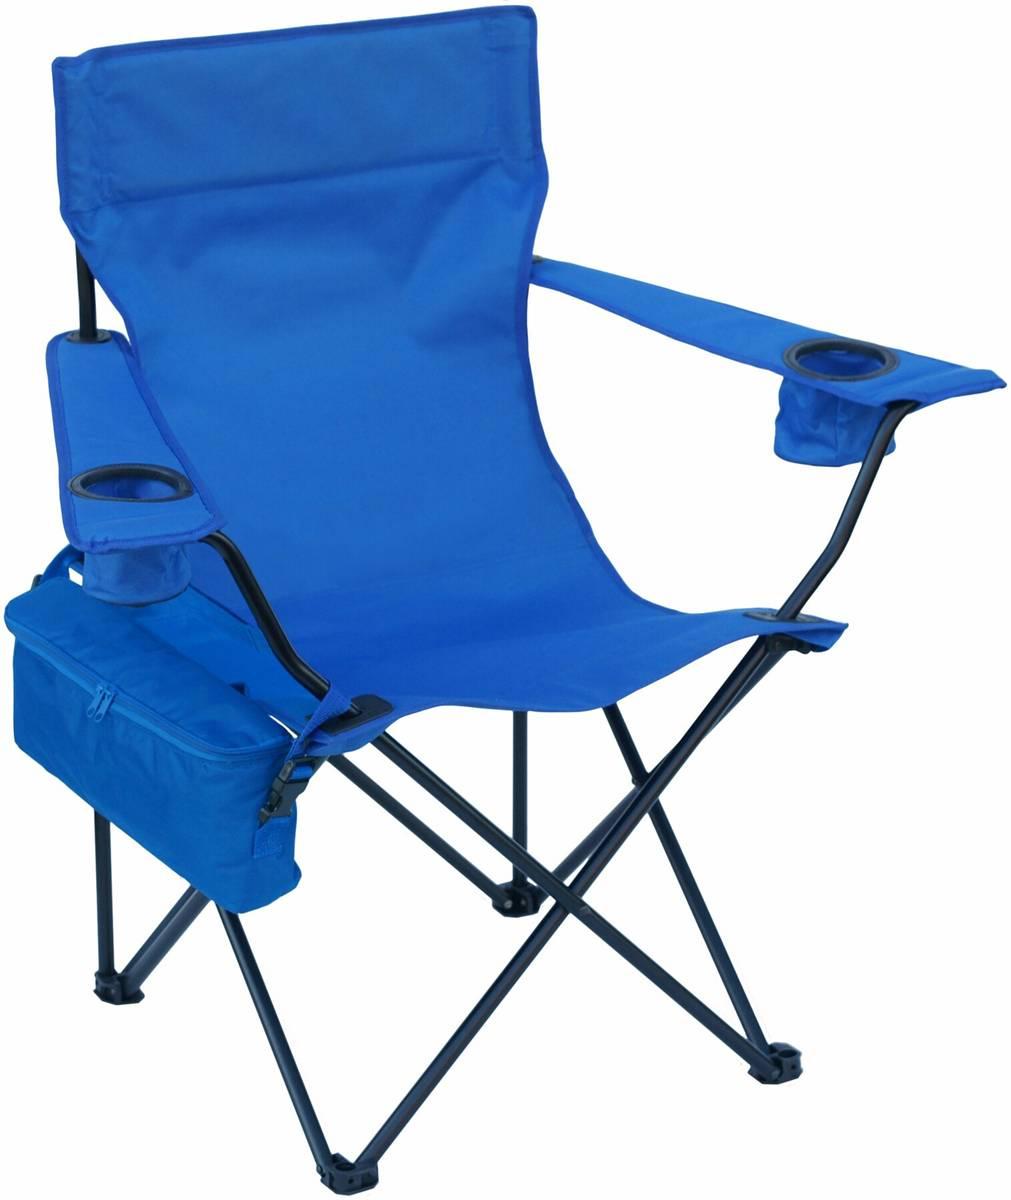 Folding Sturdy Steel Frame Chair with Cup holder